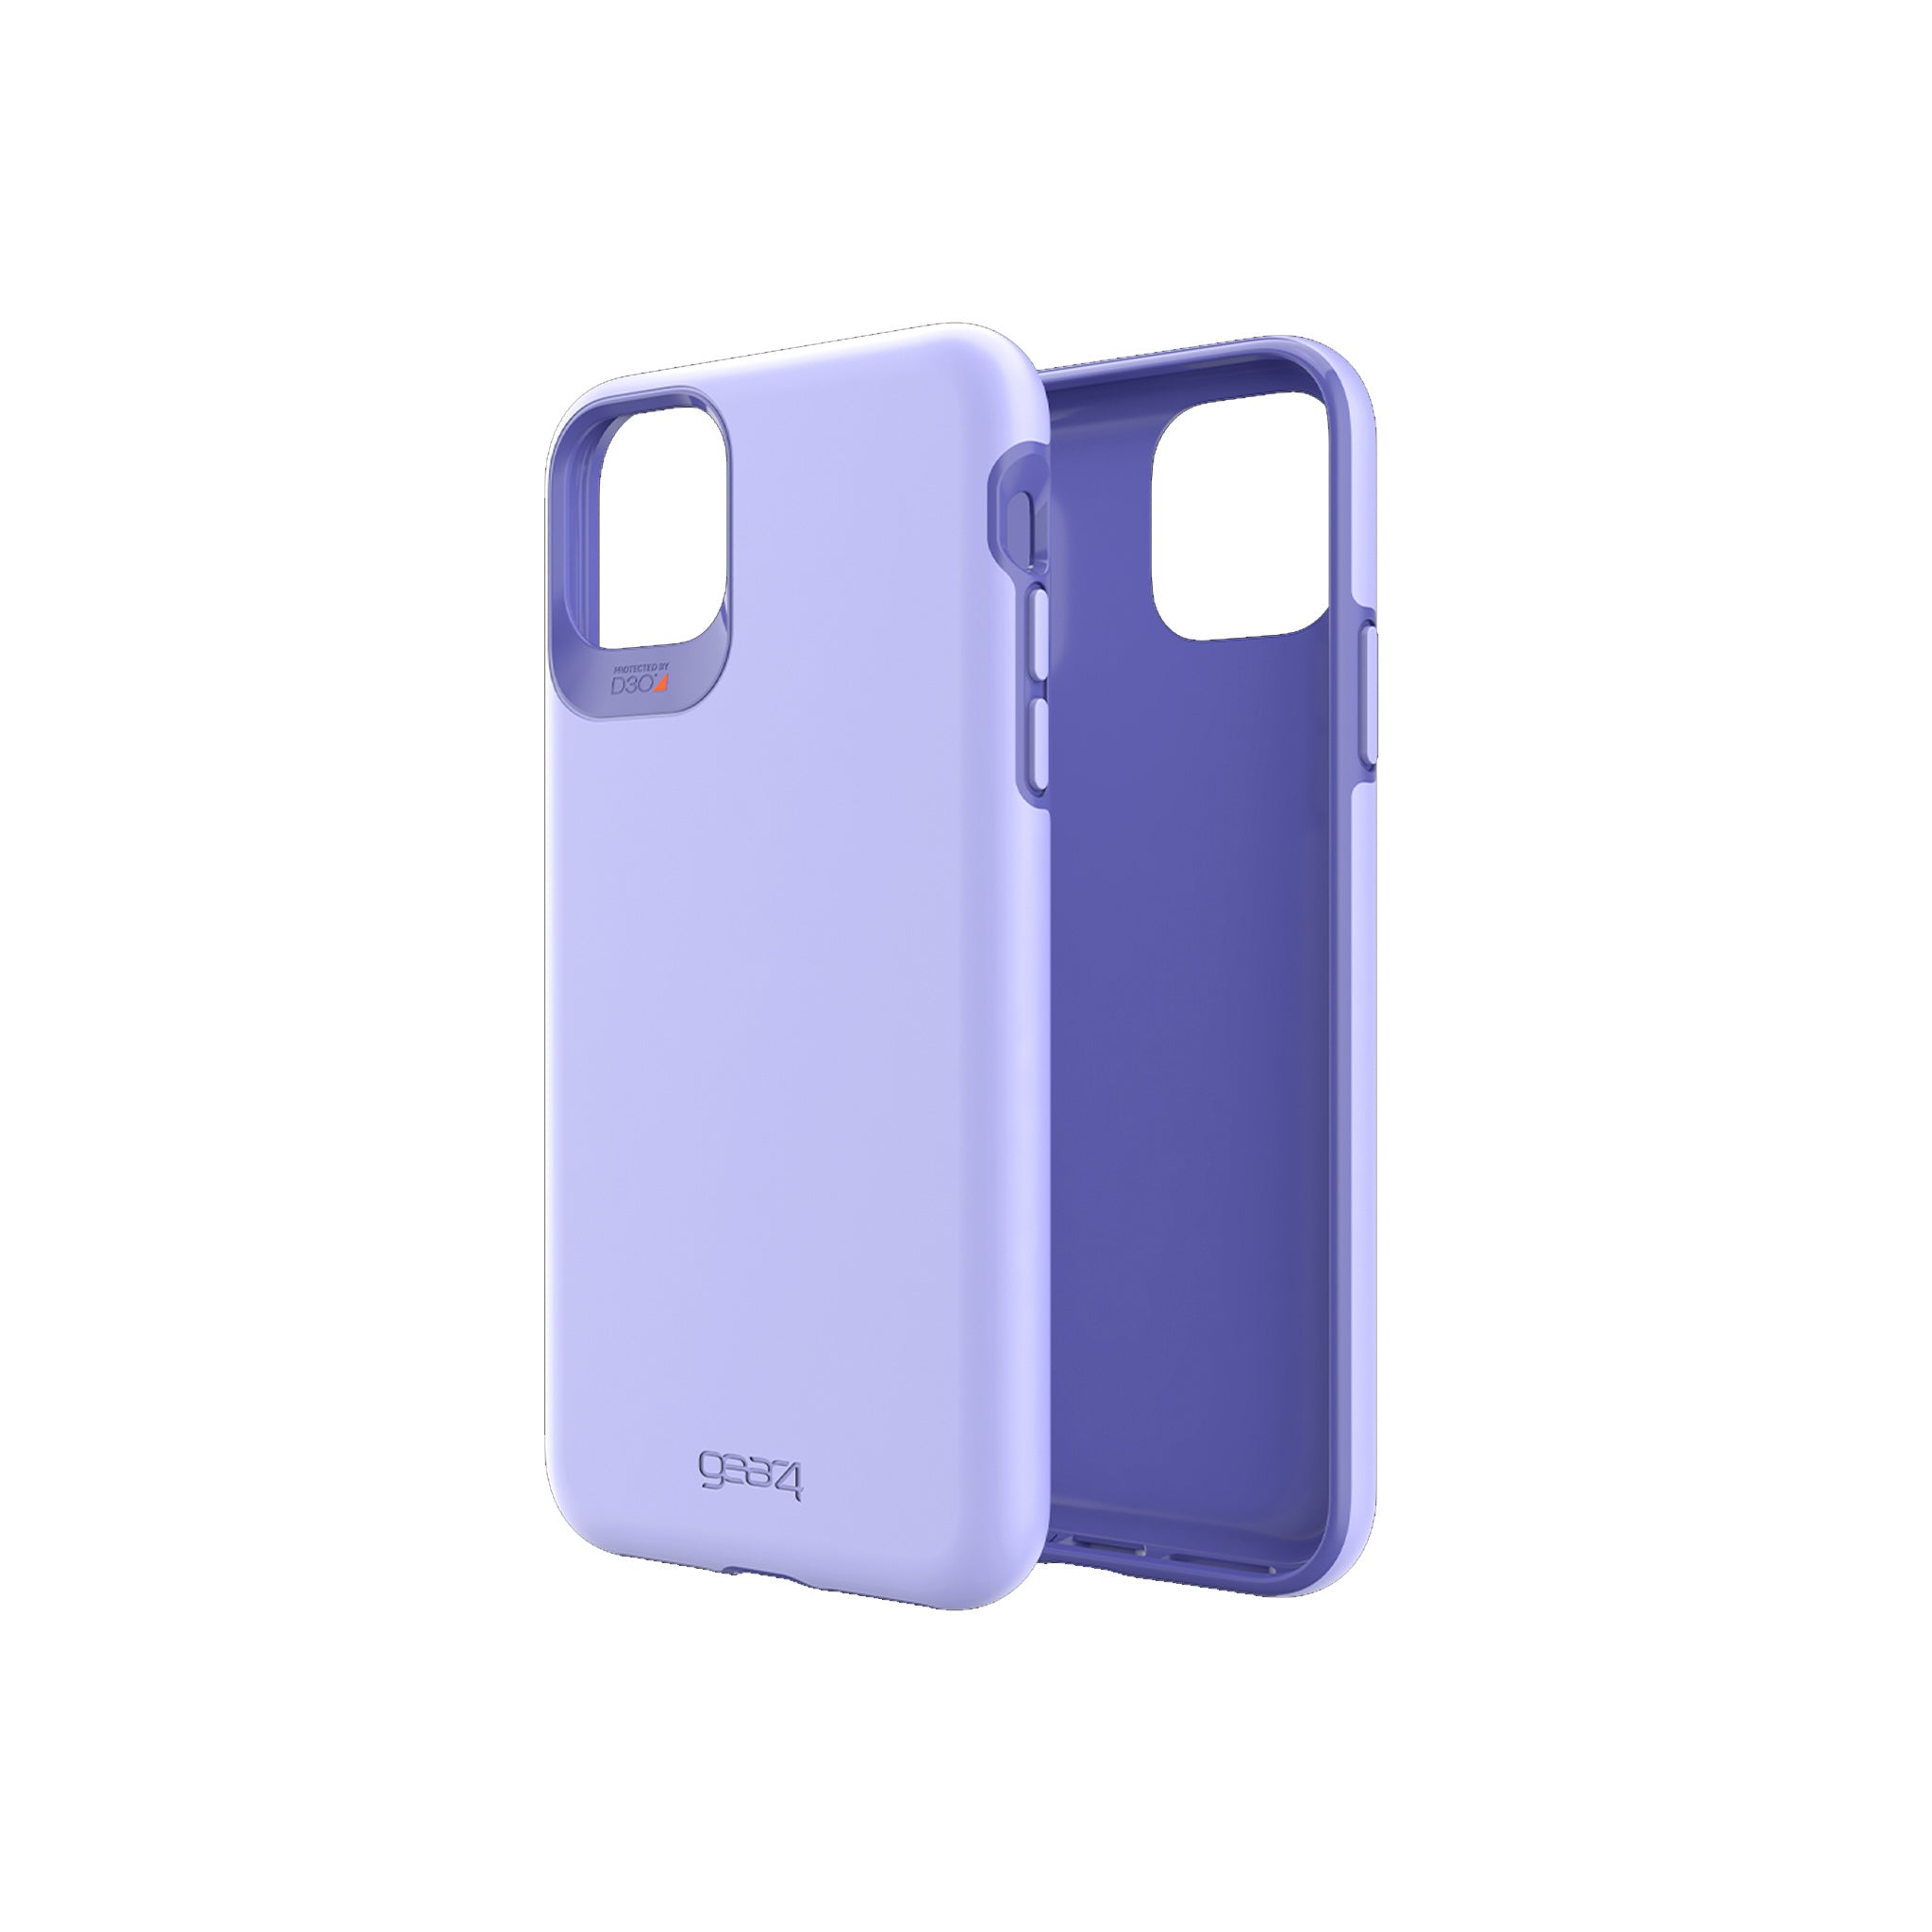 Gear4 - Holborn Case For Apple Iphone 11 Pro Max - Lilac